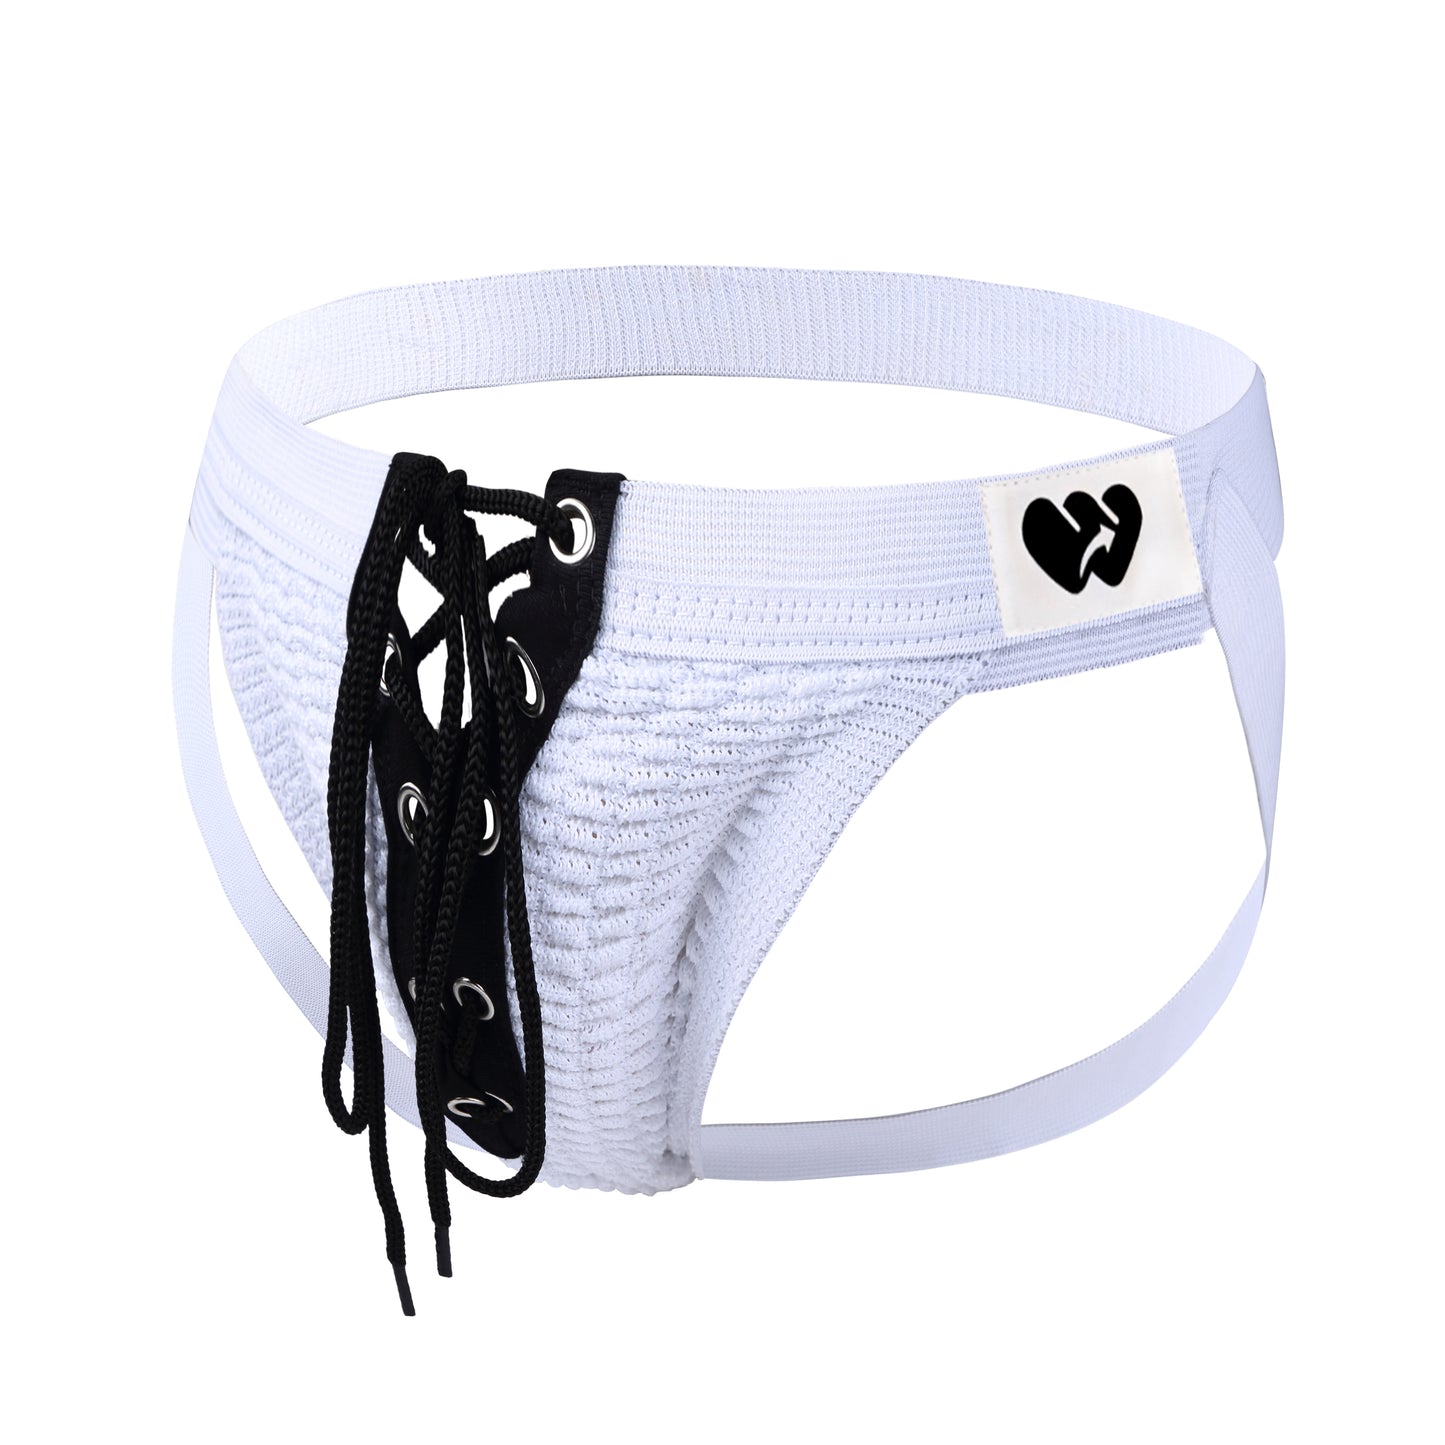 Athletic Supporter Contoured Waistband Lace - Up Front Chain Rings Jockstrap